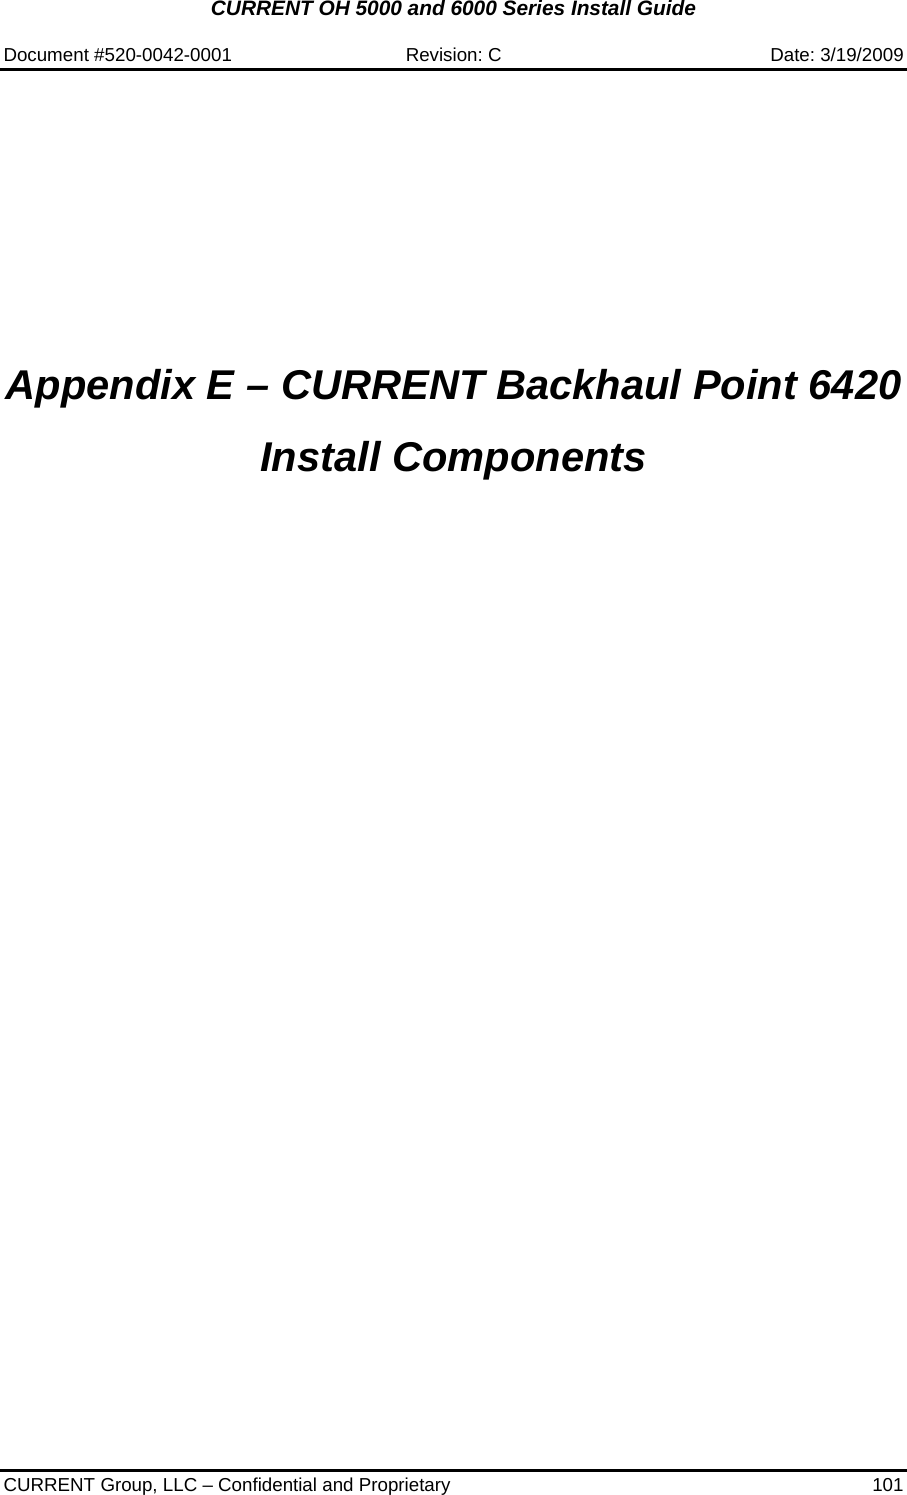 CURRENT OH 5000 and 6000 Series Install Guide  Document #520-0042-0001  Revision: C  Date: 3/19/2009  CURRENT Group, LLC – Confidential and Proprietary  101            Appendix E – CURRENT Backhaul Point 6420 Install Components             